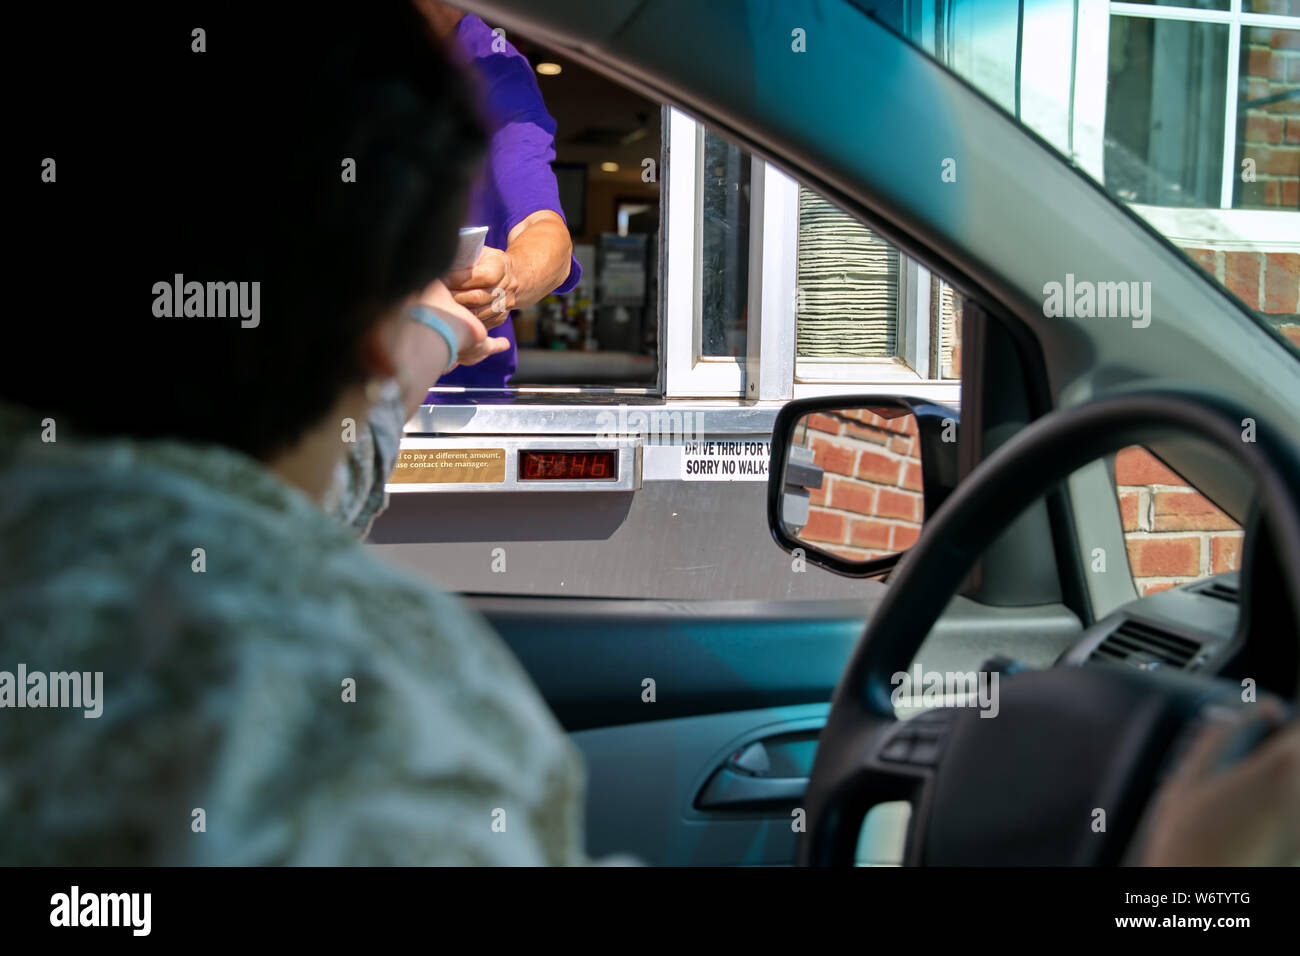 Fast food employee and customer hands in a transaction at the drive thru. Stock Photo